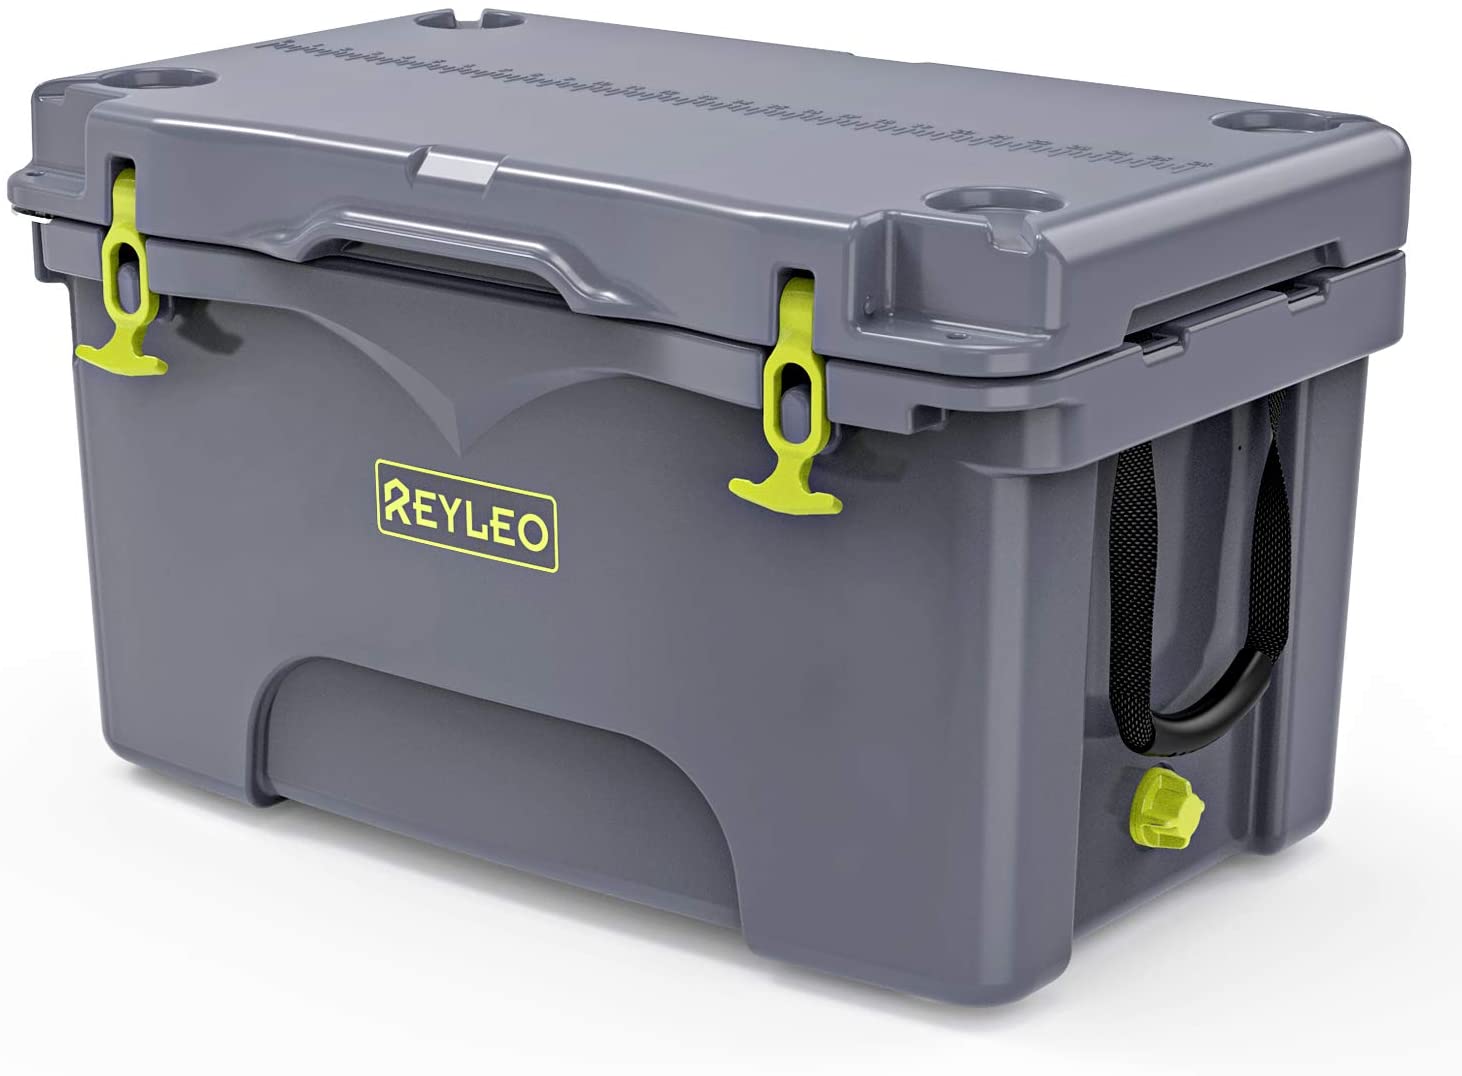 A REYLEO cooler on a white background.